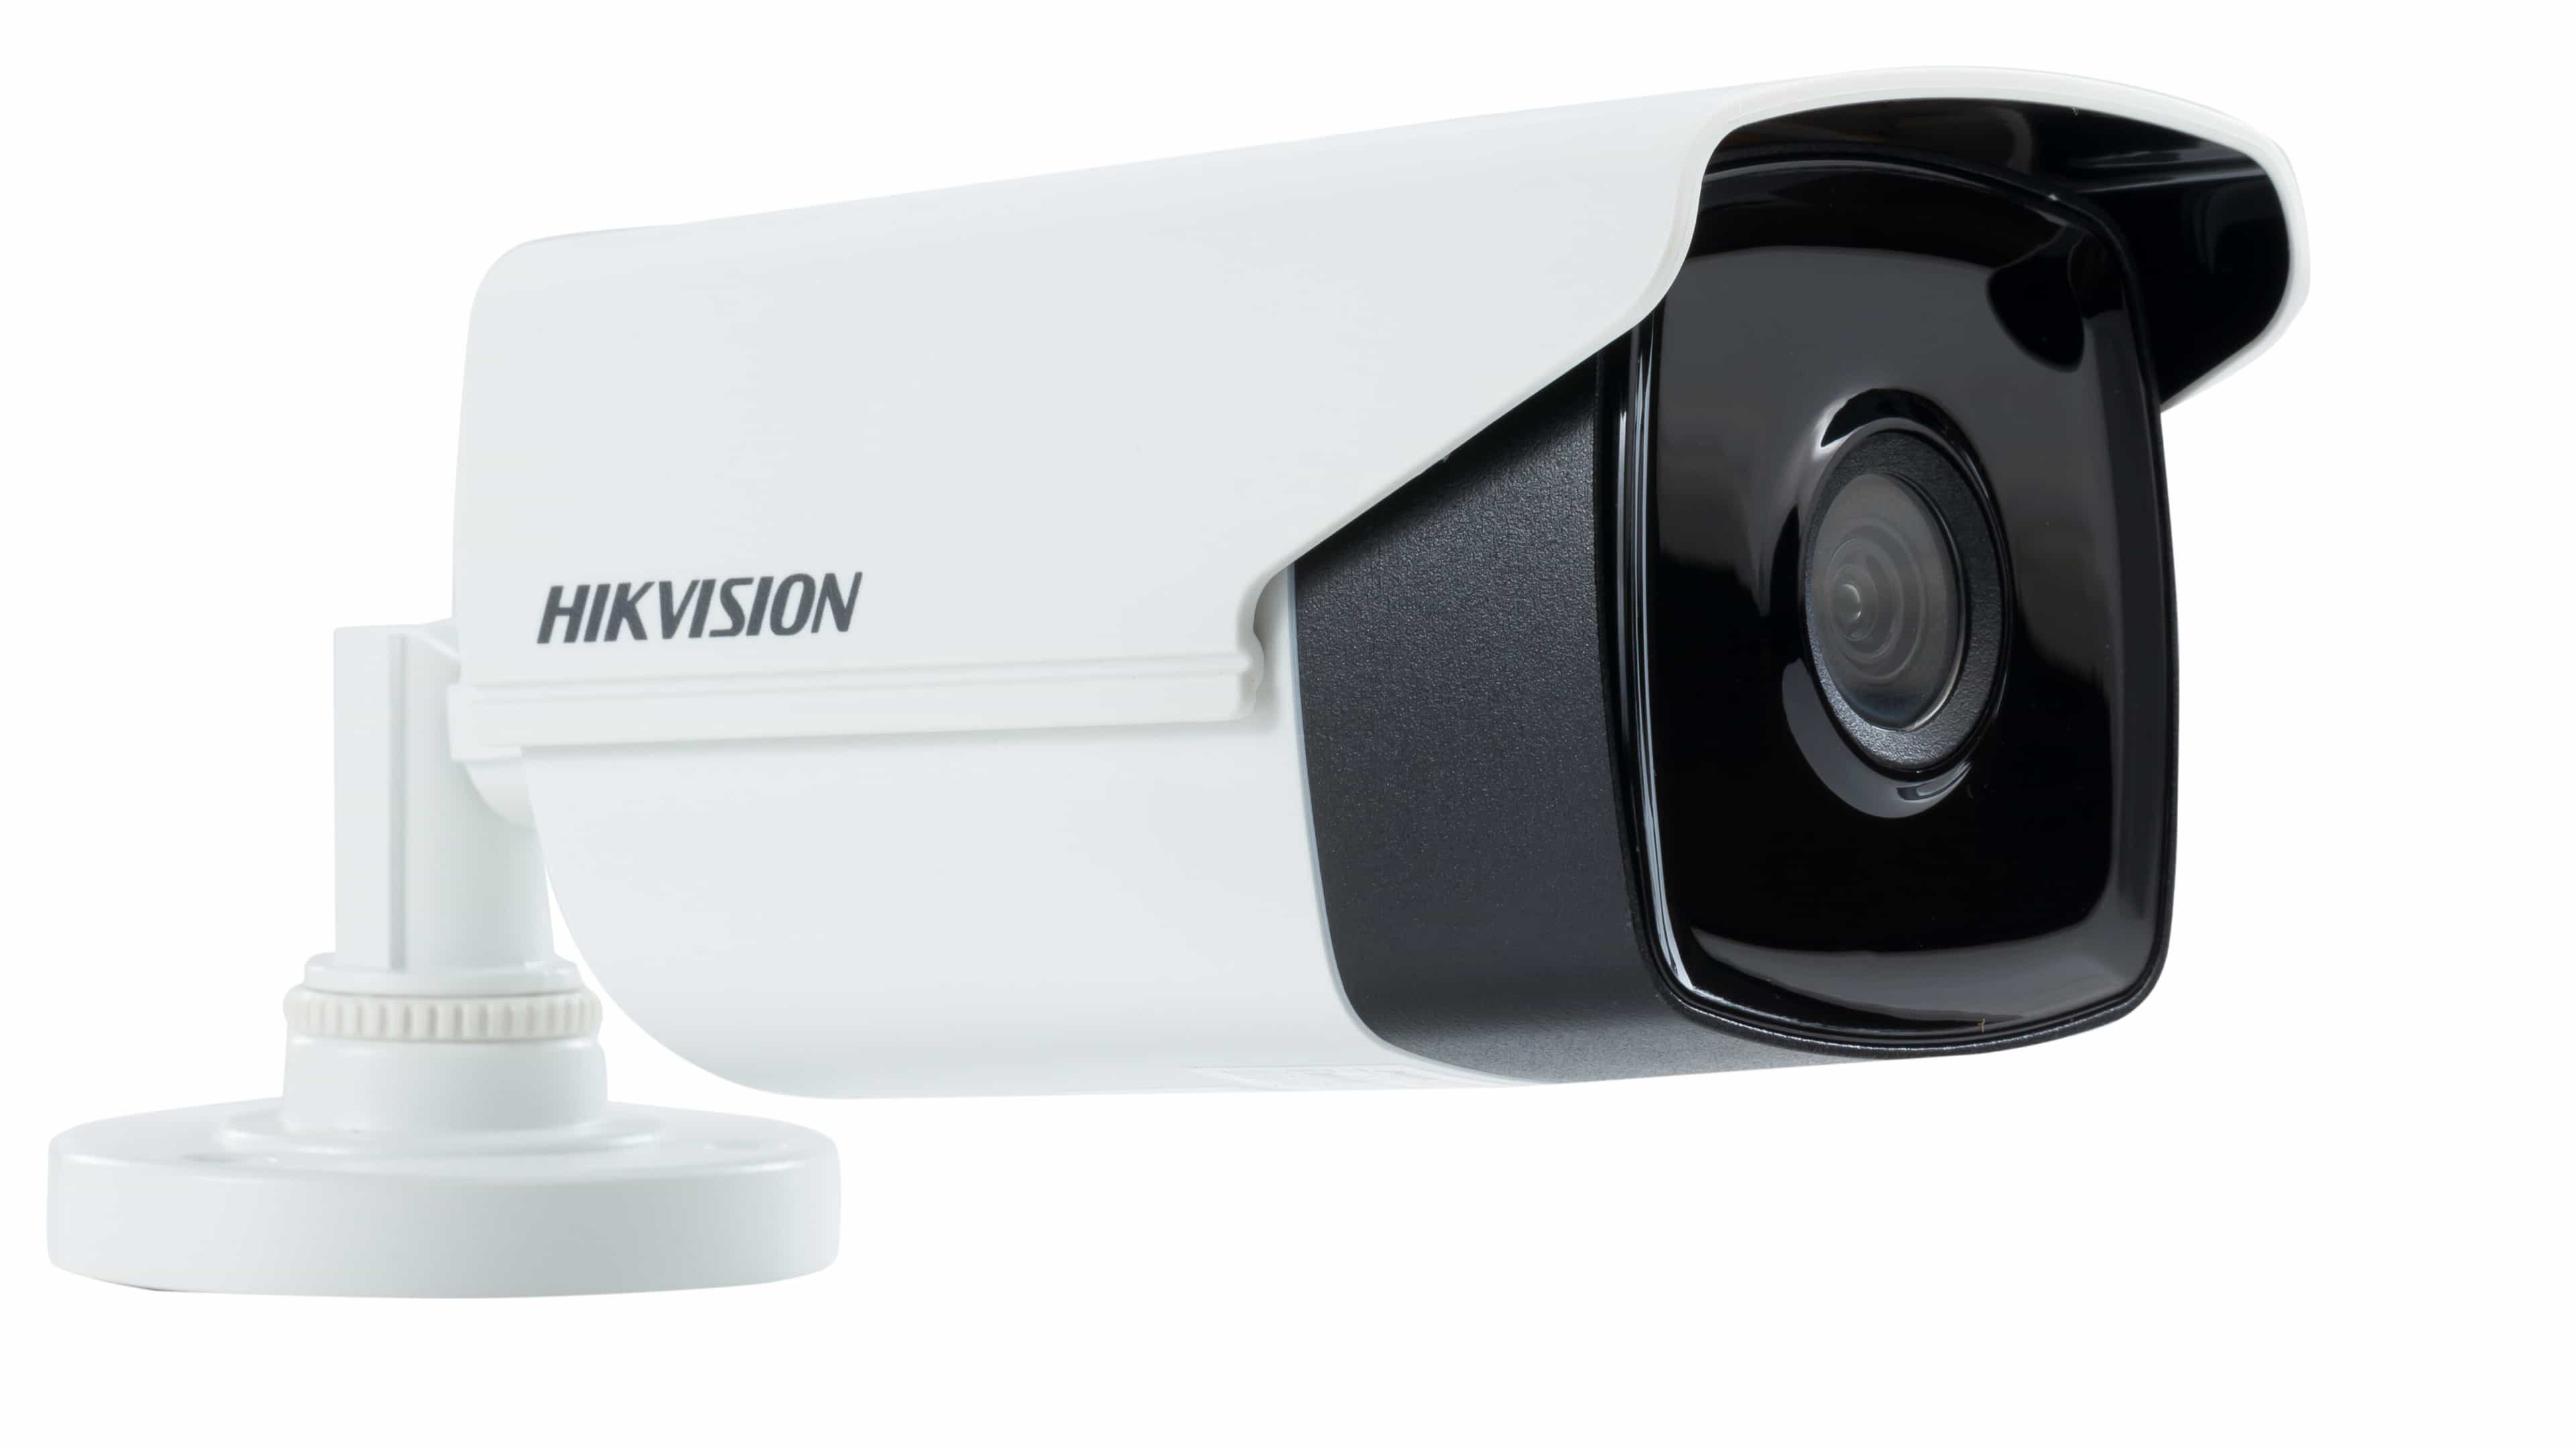 Hikvision-2MP-Analog-HD-IR-Bullet-Camera-DS-2CE1AD0T-IT1F-image_1